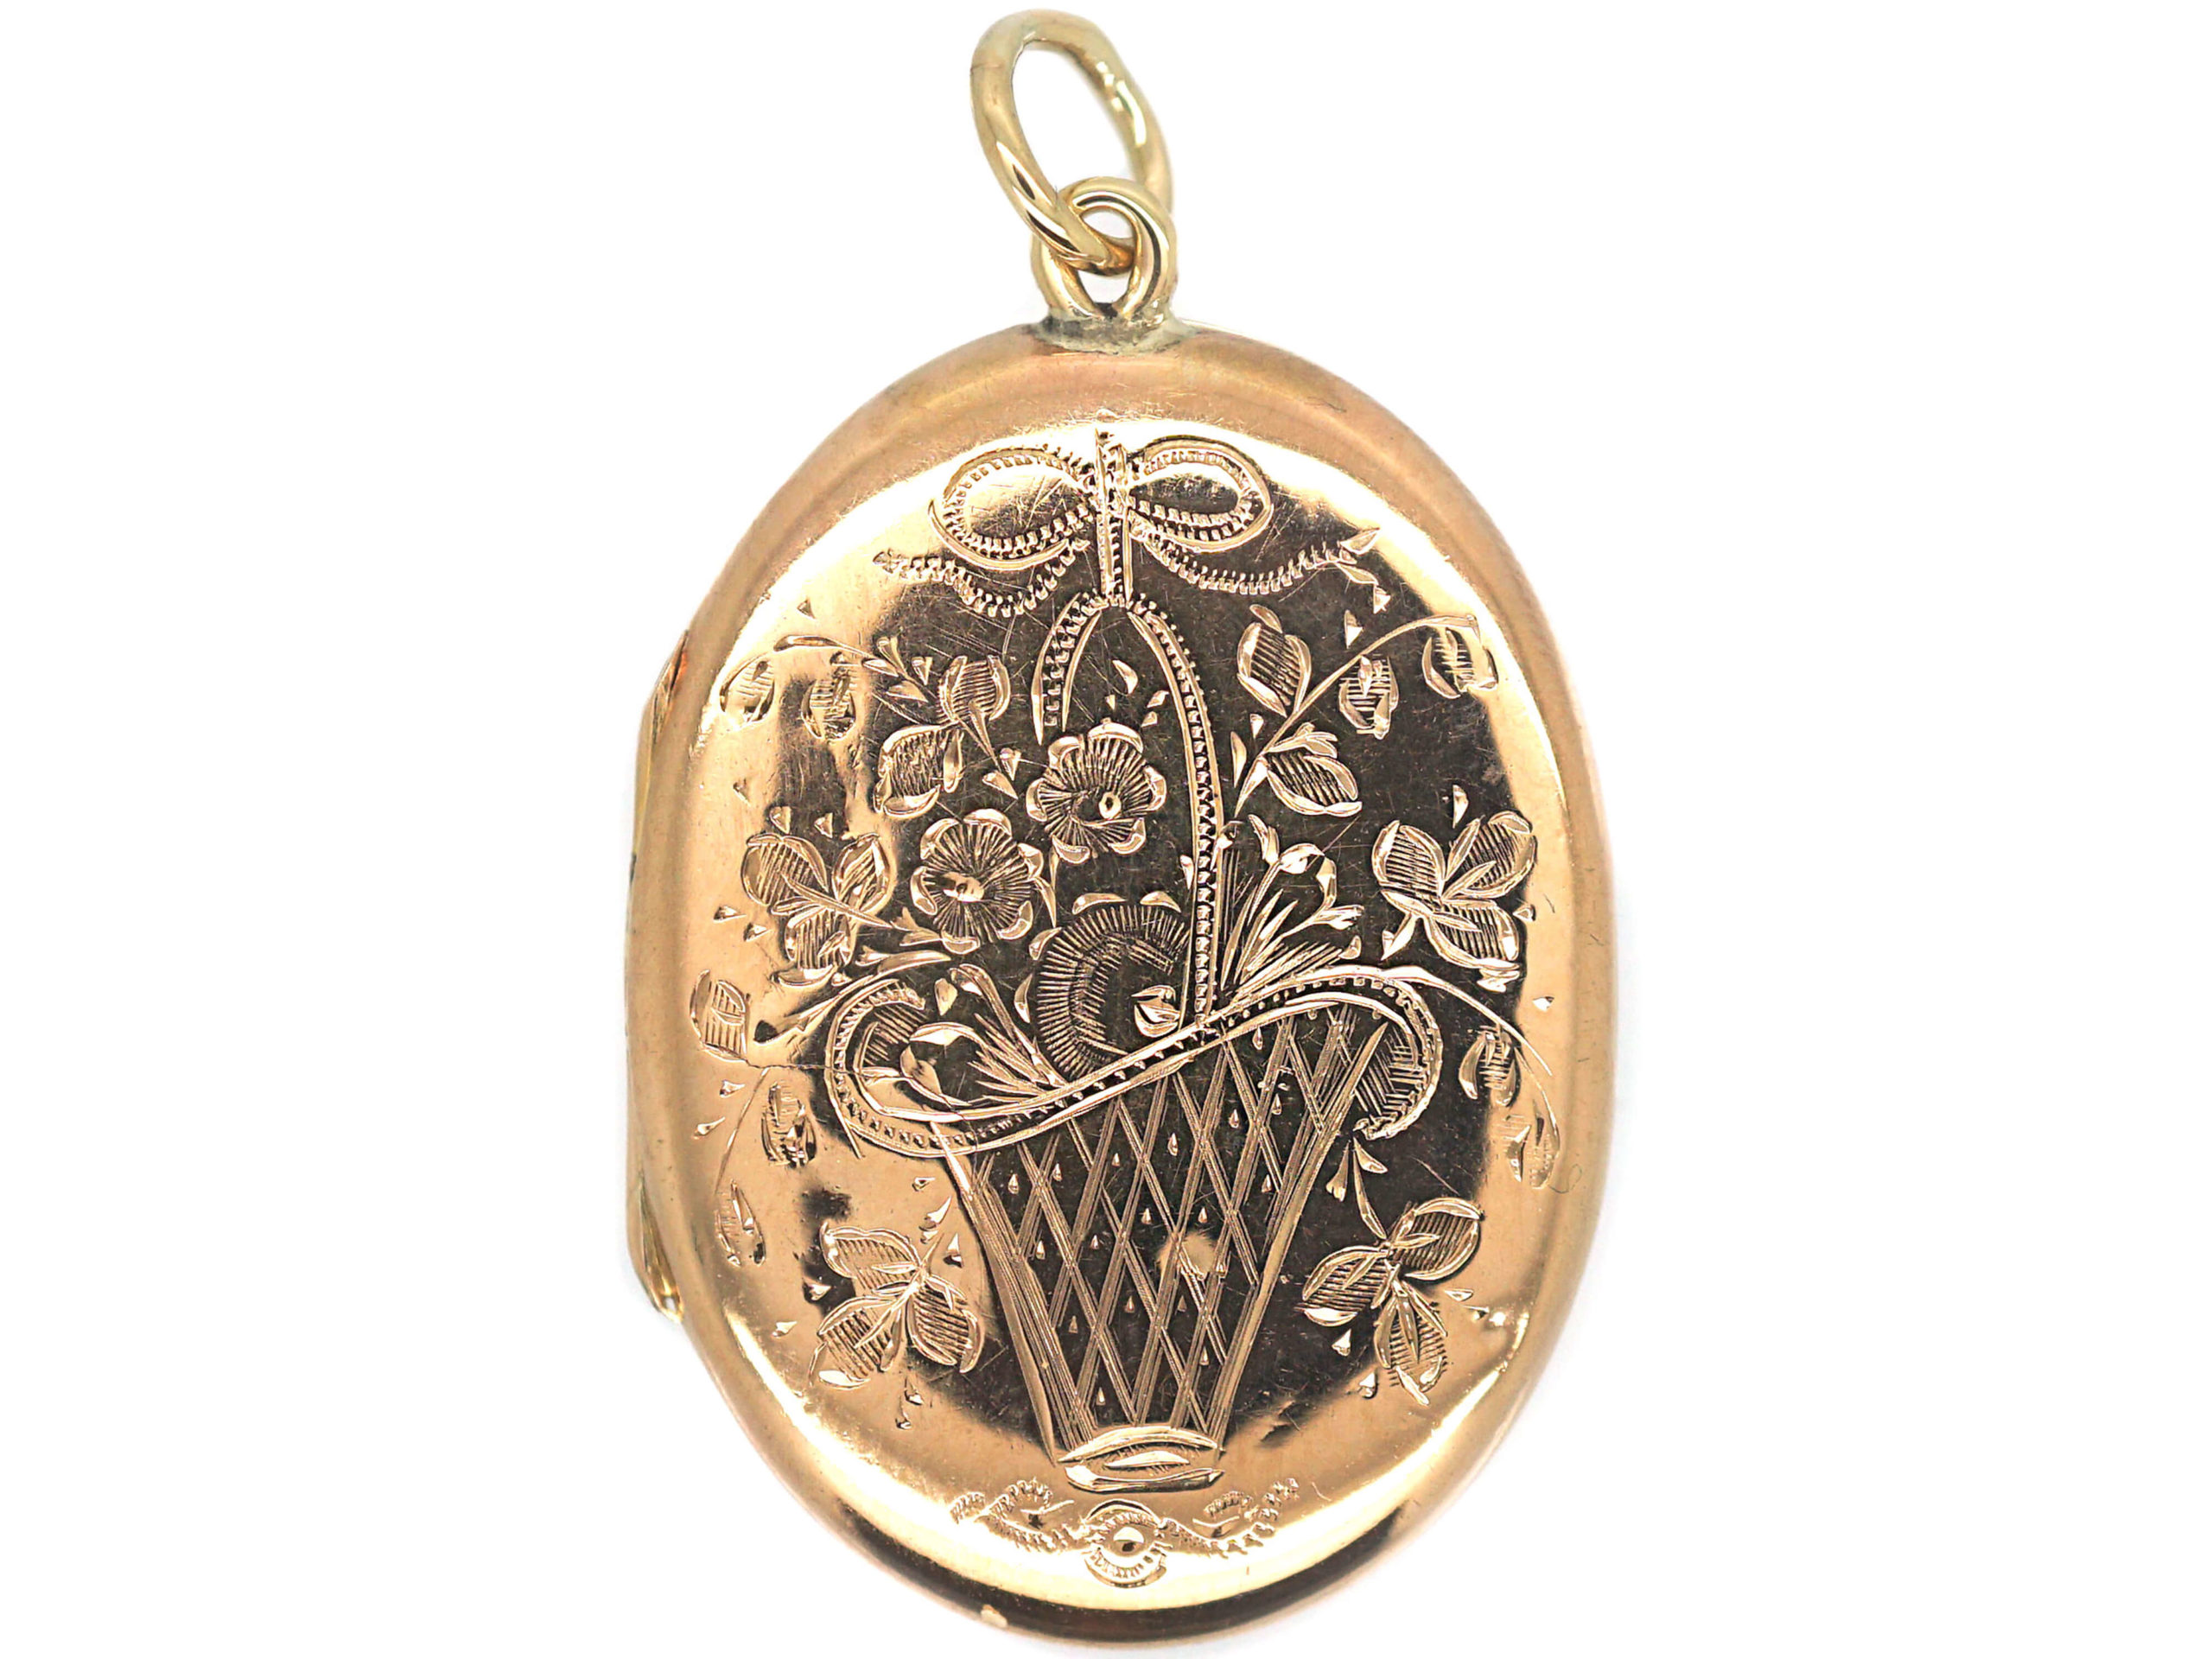 Edwardian 9ct Gold Oval Locket with Flower Basket Motif (442P) | The ...